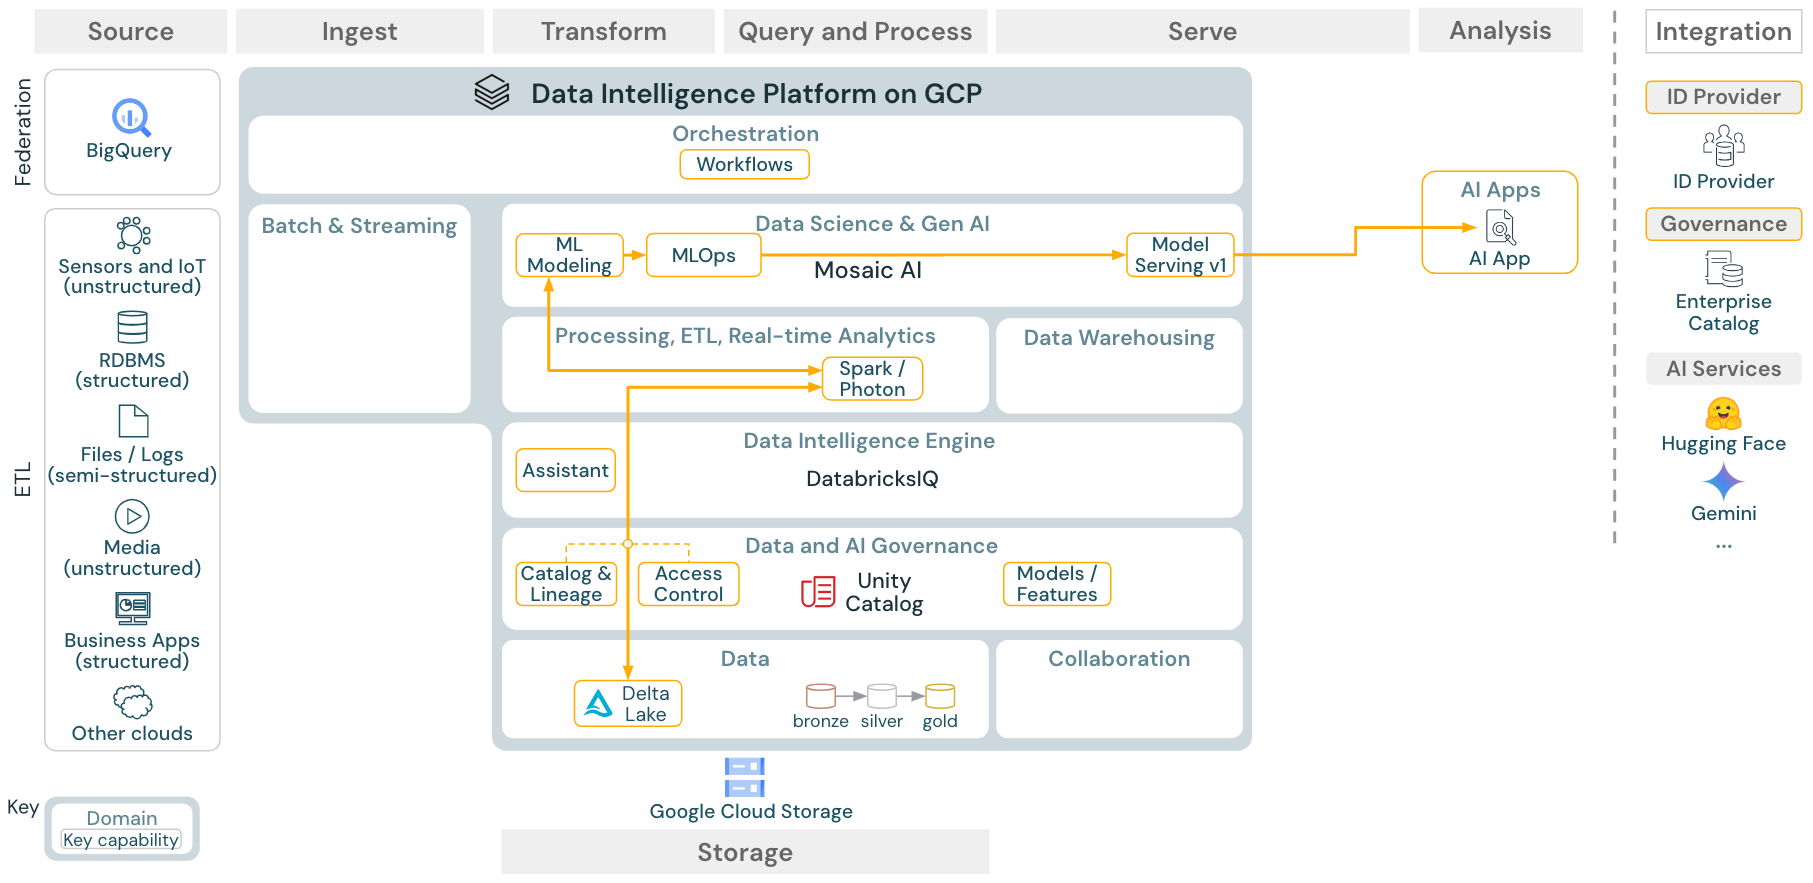 Machine learning and AI reference architecture for Databricks on Google Cloud